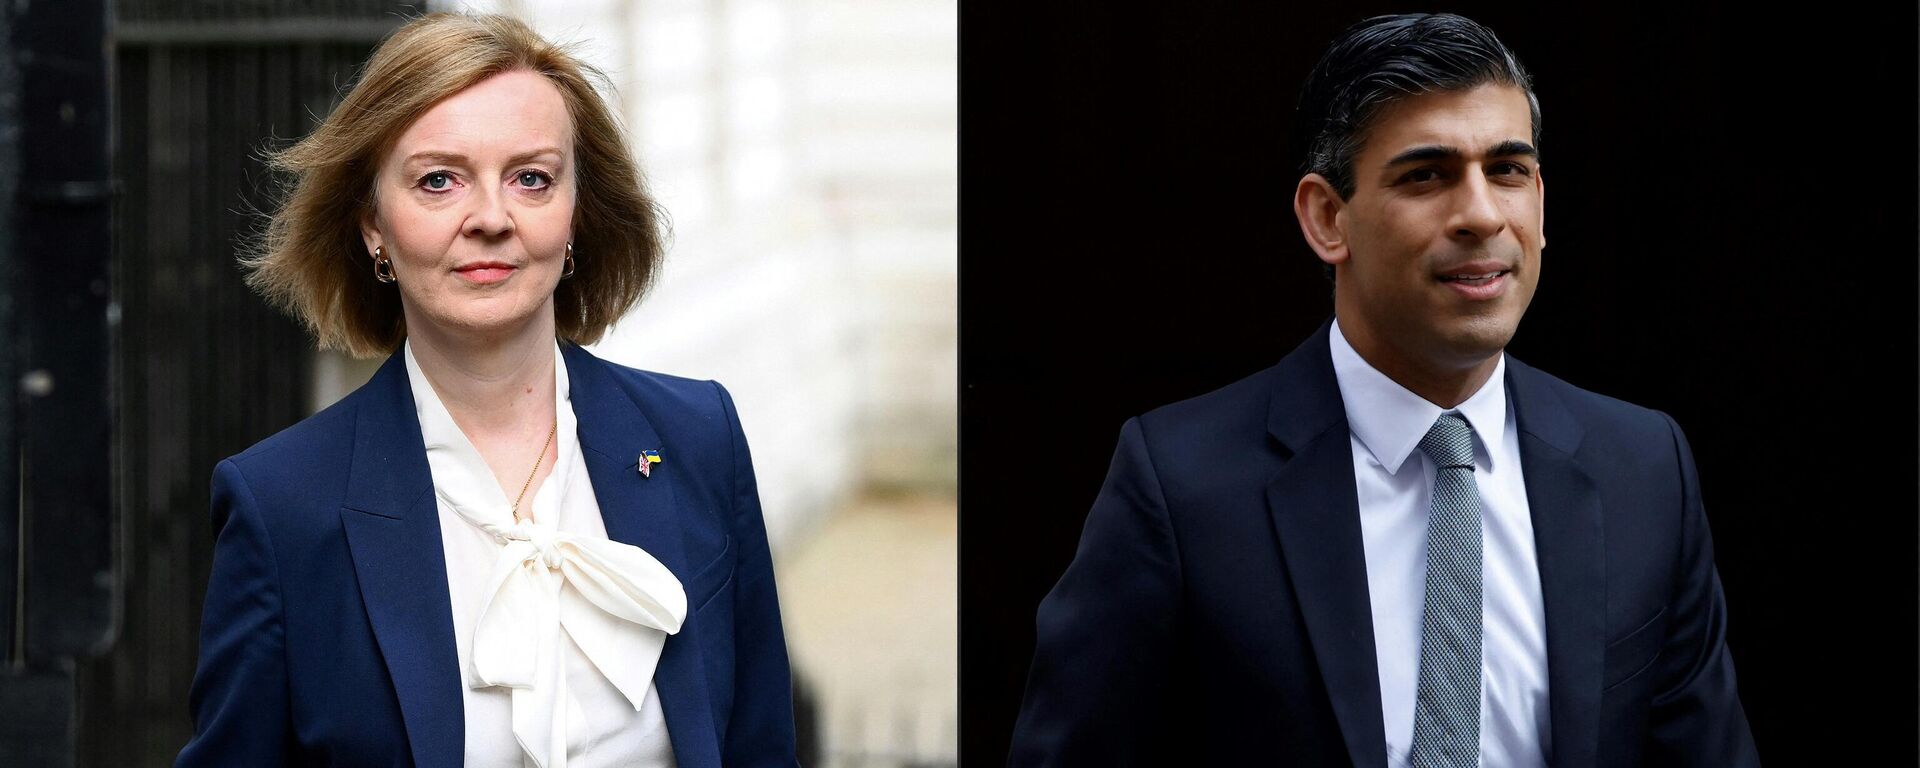 (COMBO) This combination of pictures created on July 12, 2022 shows Britain's Foreign Secretary Liz Truss (L) arriving to attend the weekly Cabinet meeting at 10 Downing Street, in London, on April 19, 2022 and Britain's Chancellor of the Exchequer Rishi Sunak leaving the 11 Downing Street, in London, on March 23, 2022.  - Sputnik International, 1920, 20.07.2022